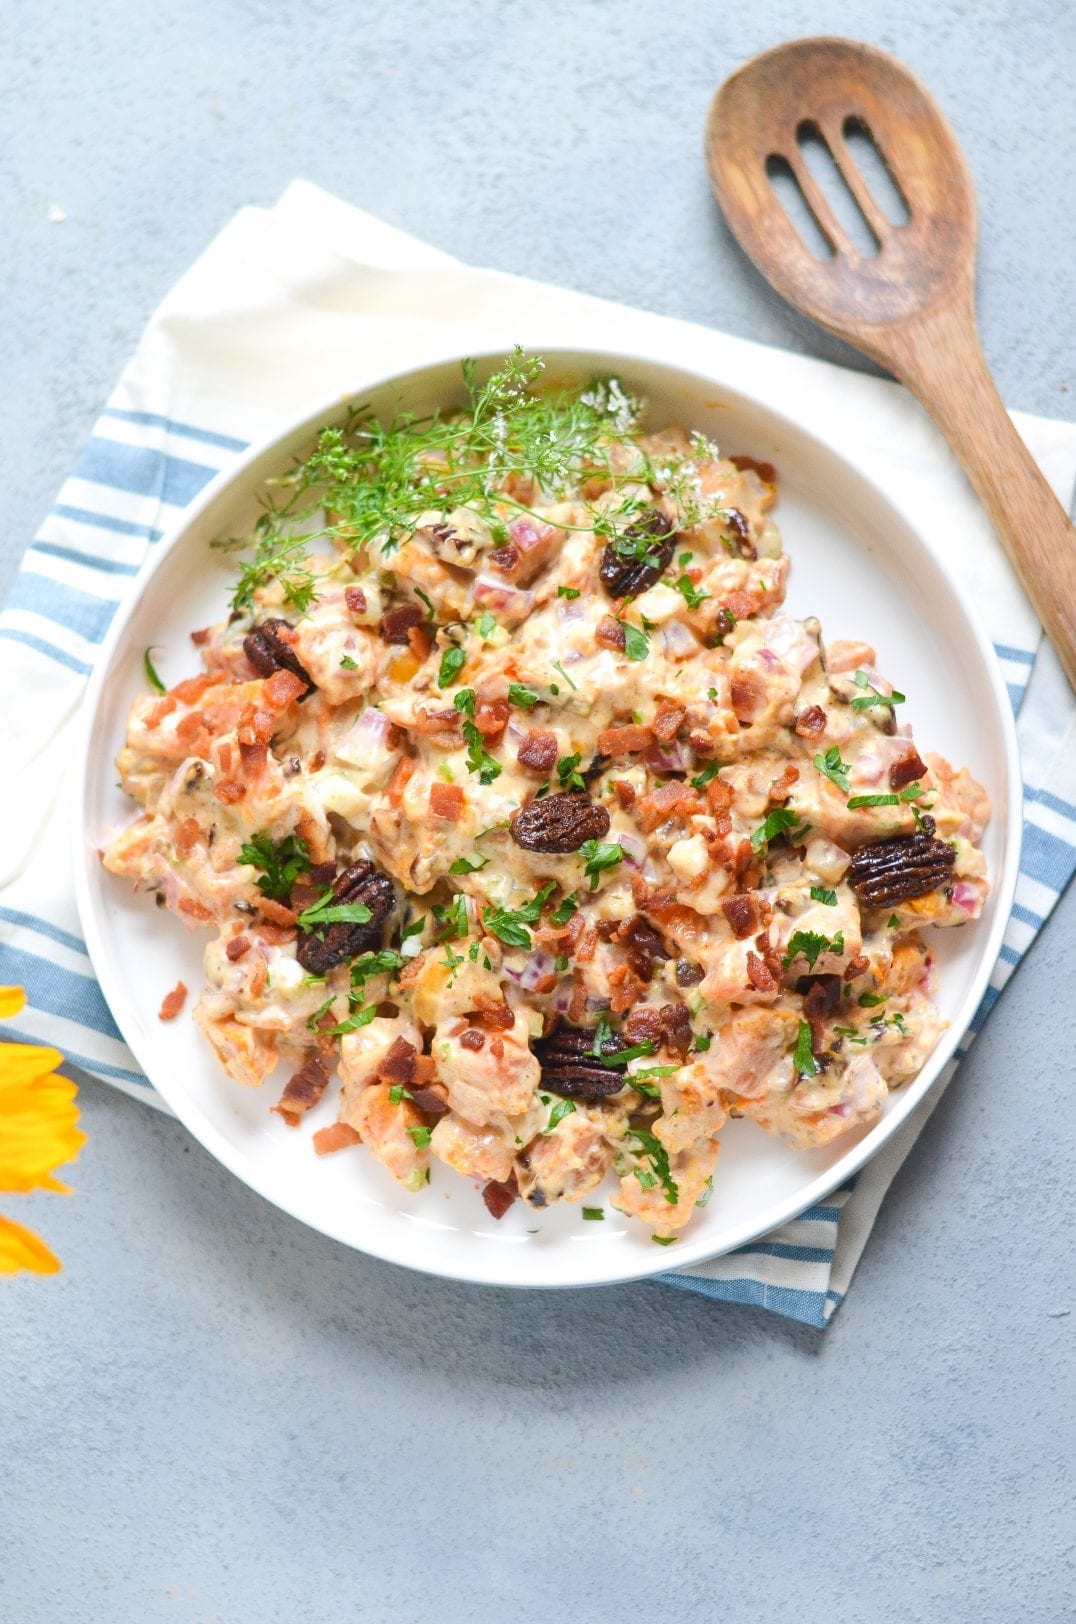 Sweet Potato Salad with Bacon and Spiced Pecans